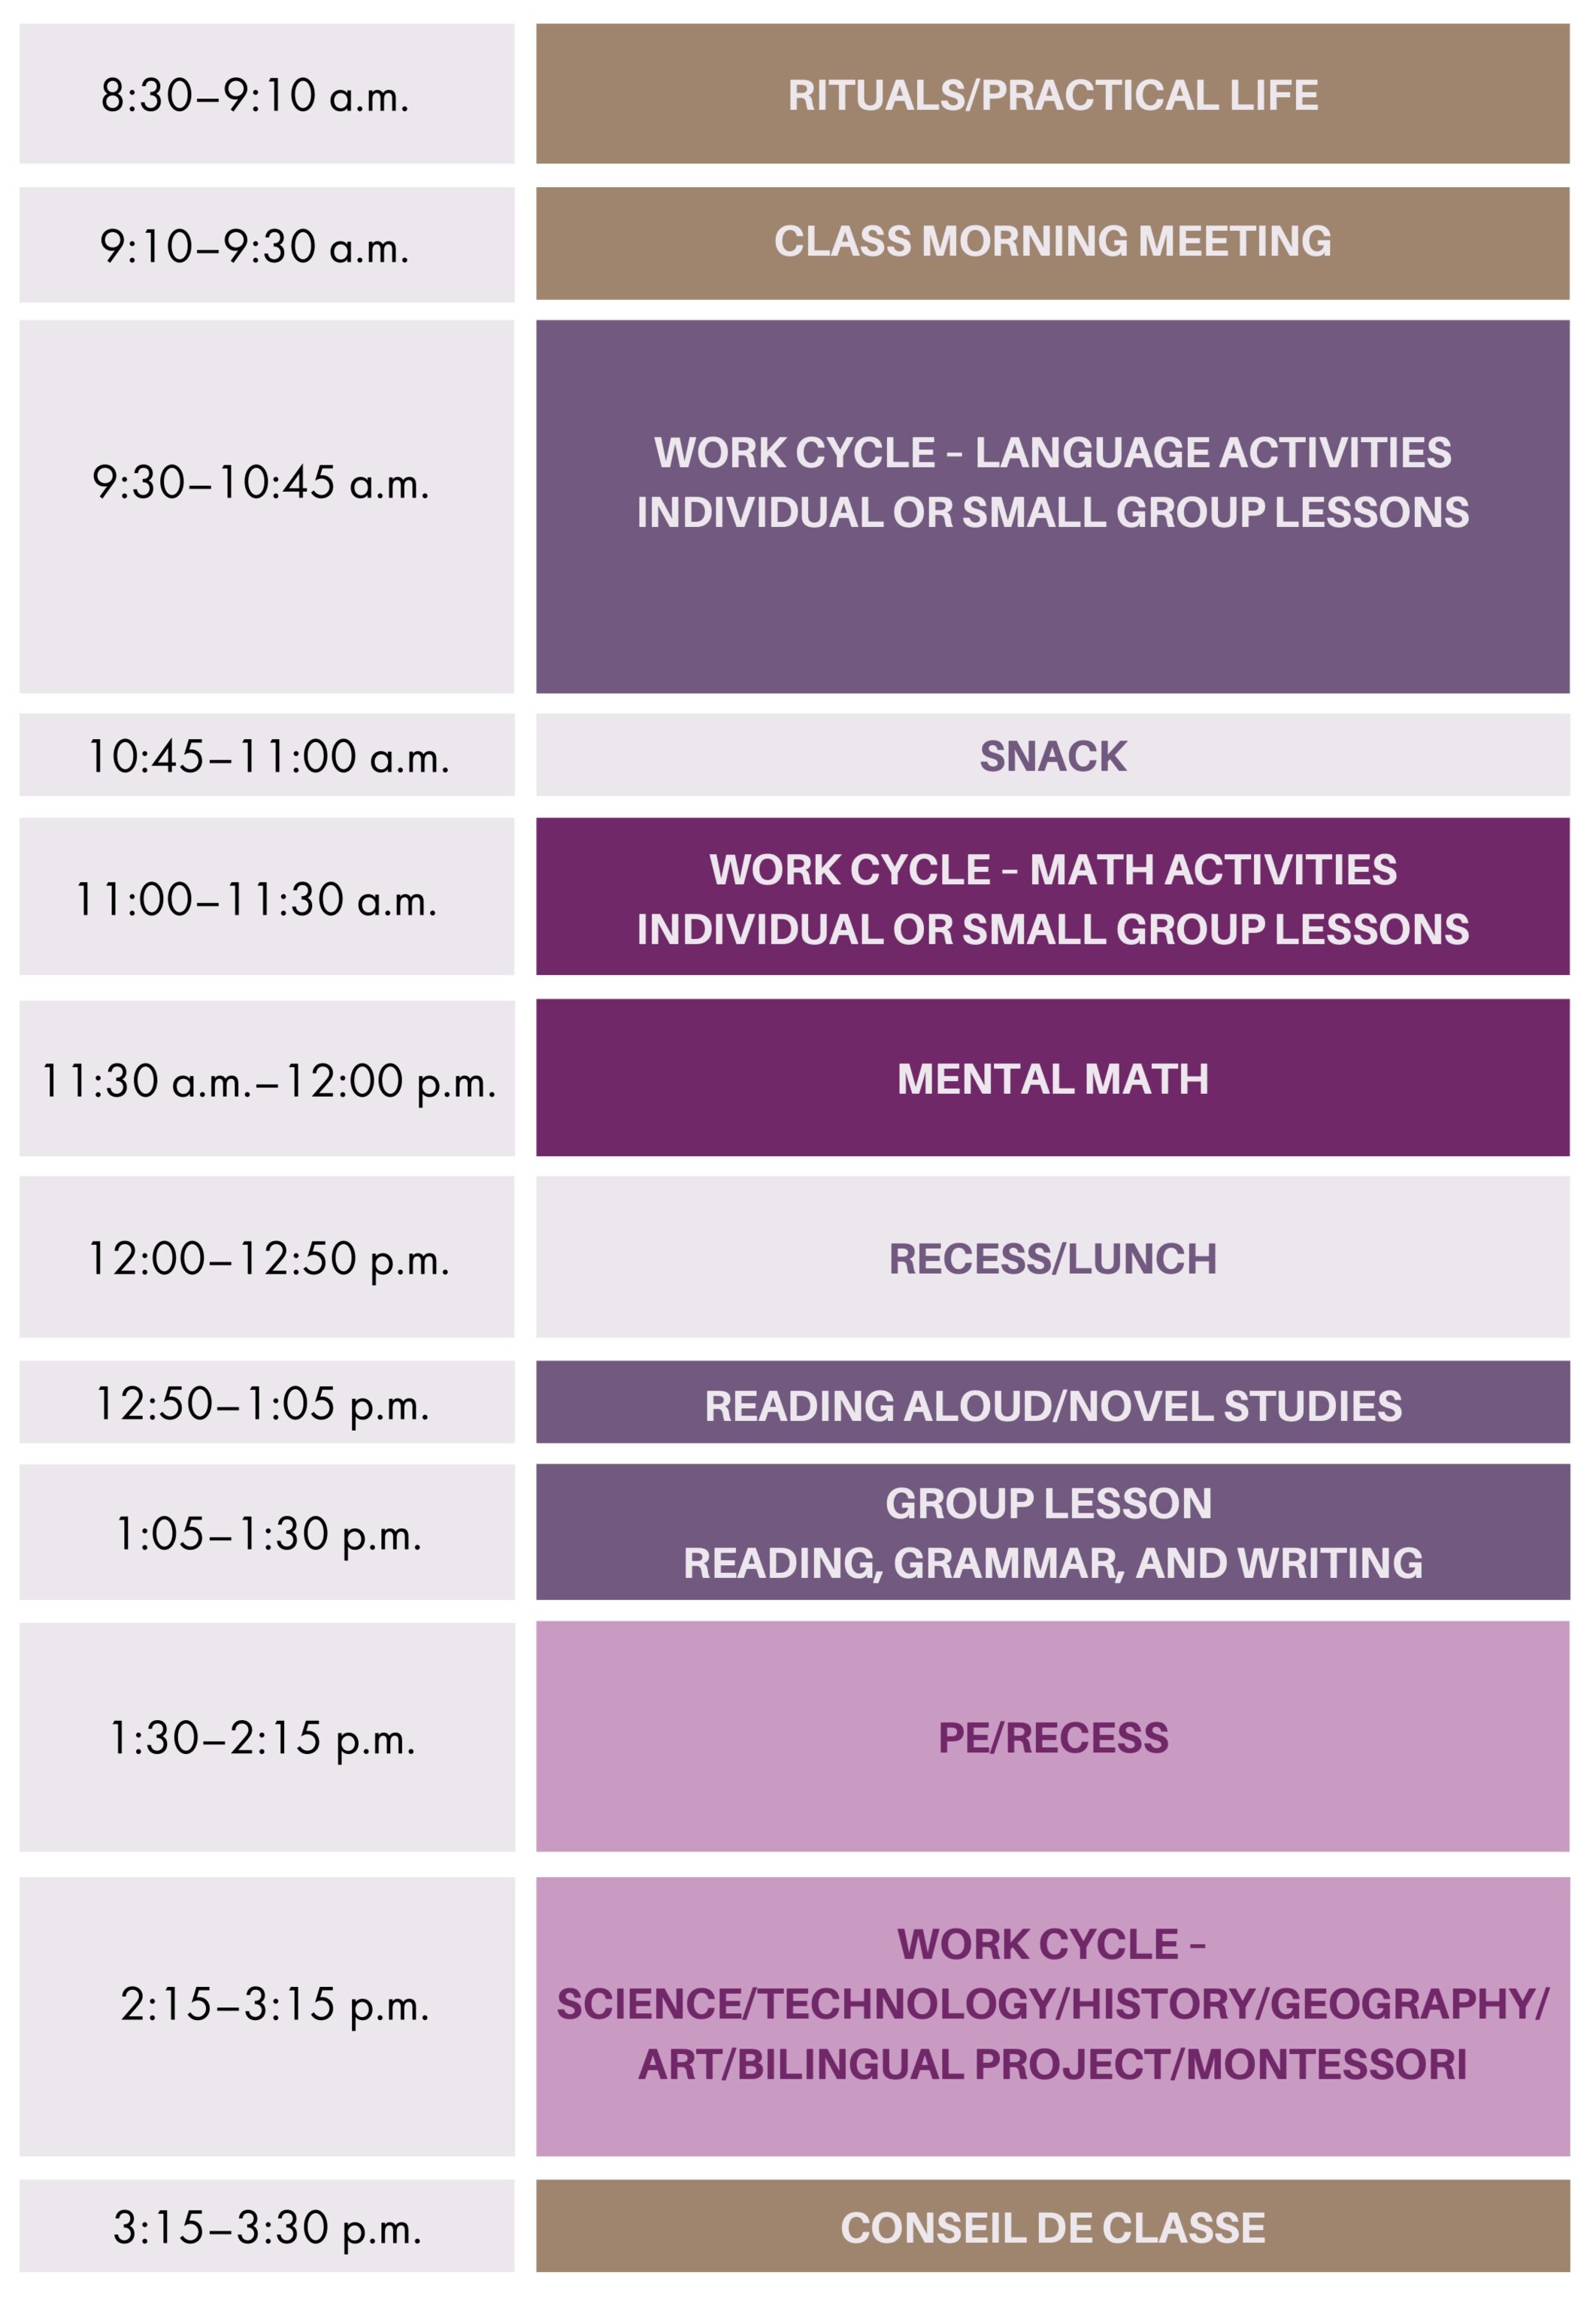 Sample daily schedule at Les Lilas French Bilingual Community School